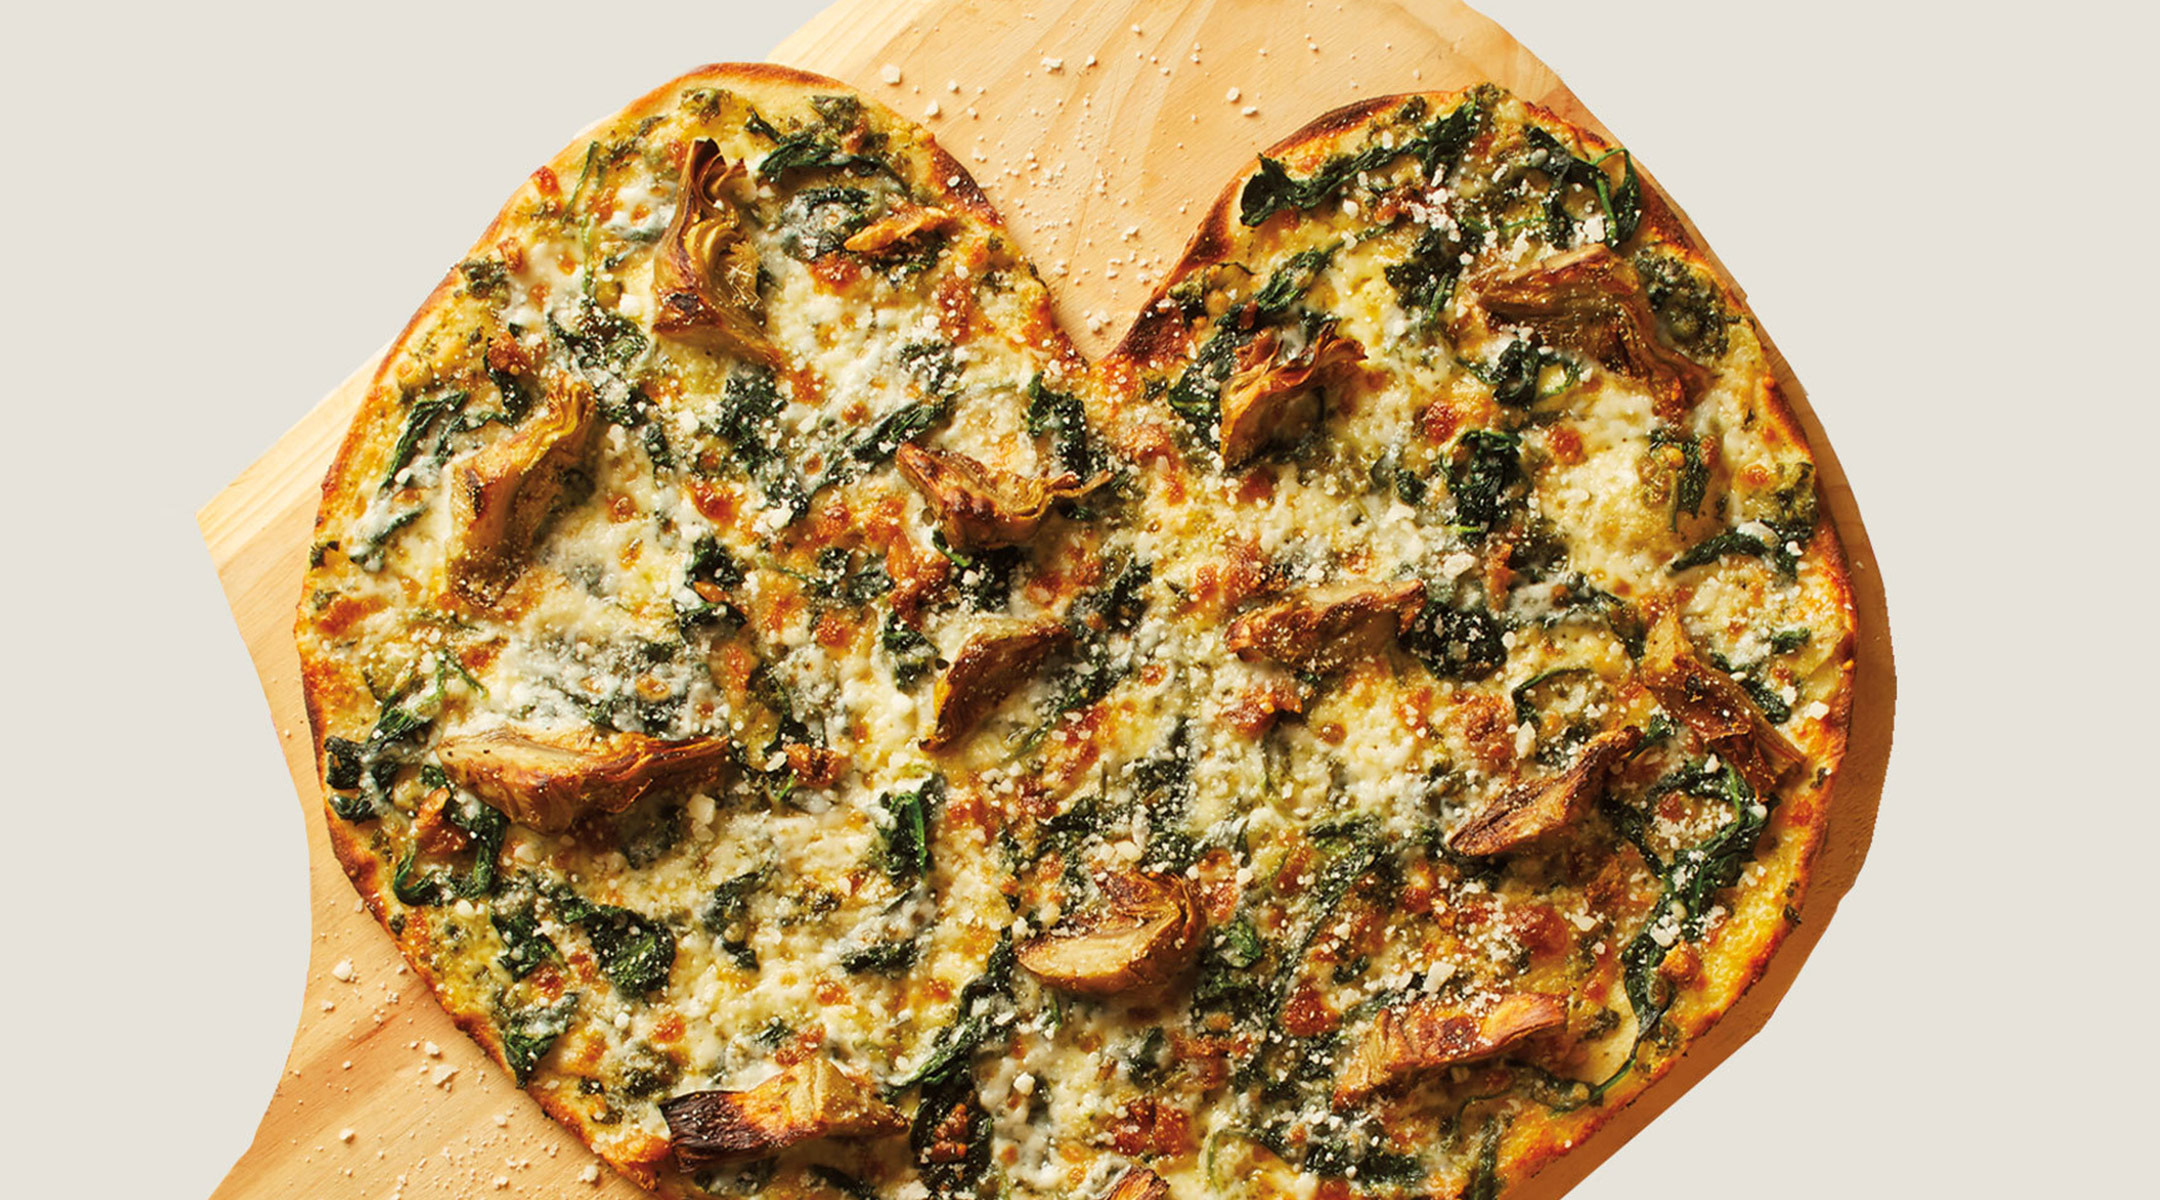 california pizza kitchen makes heart shape pizza pie for mother's day